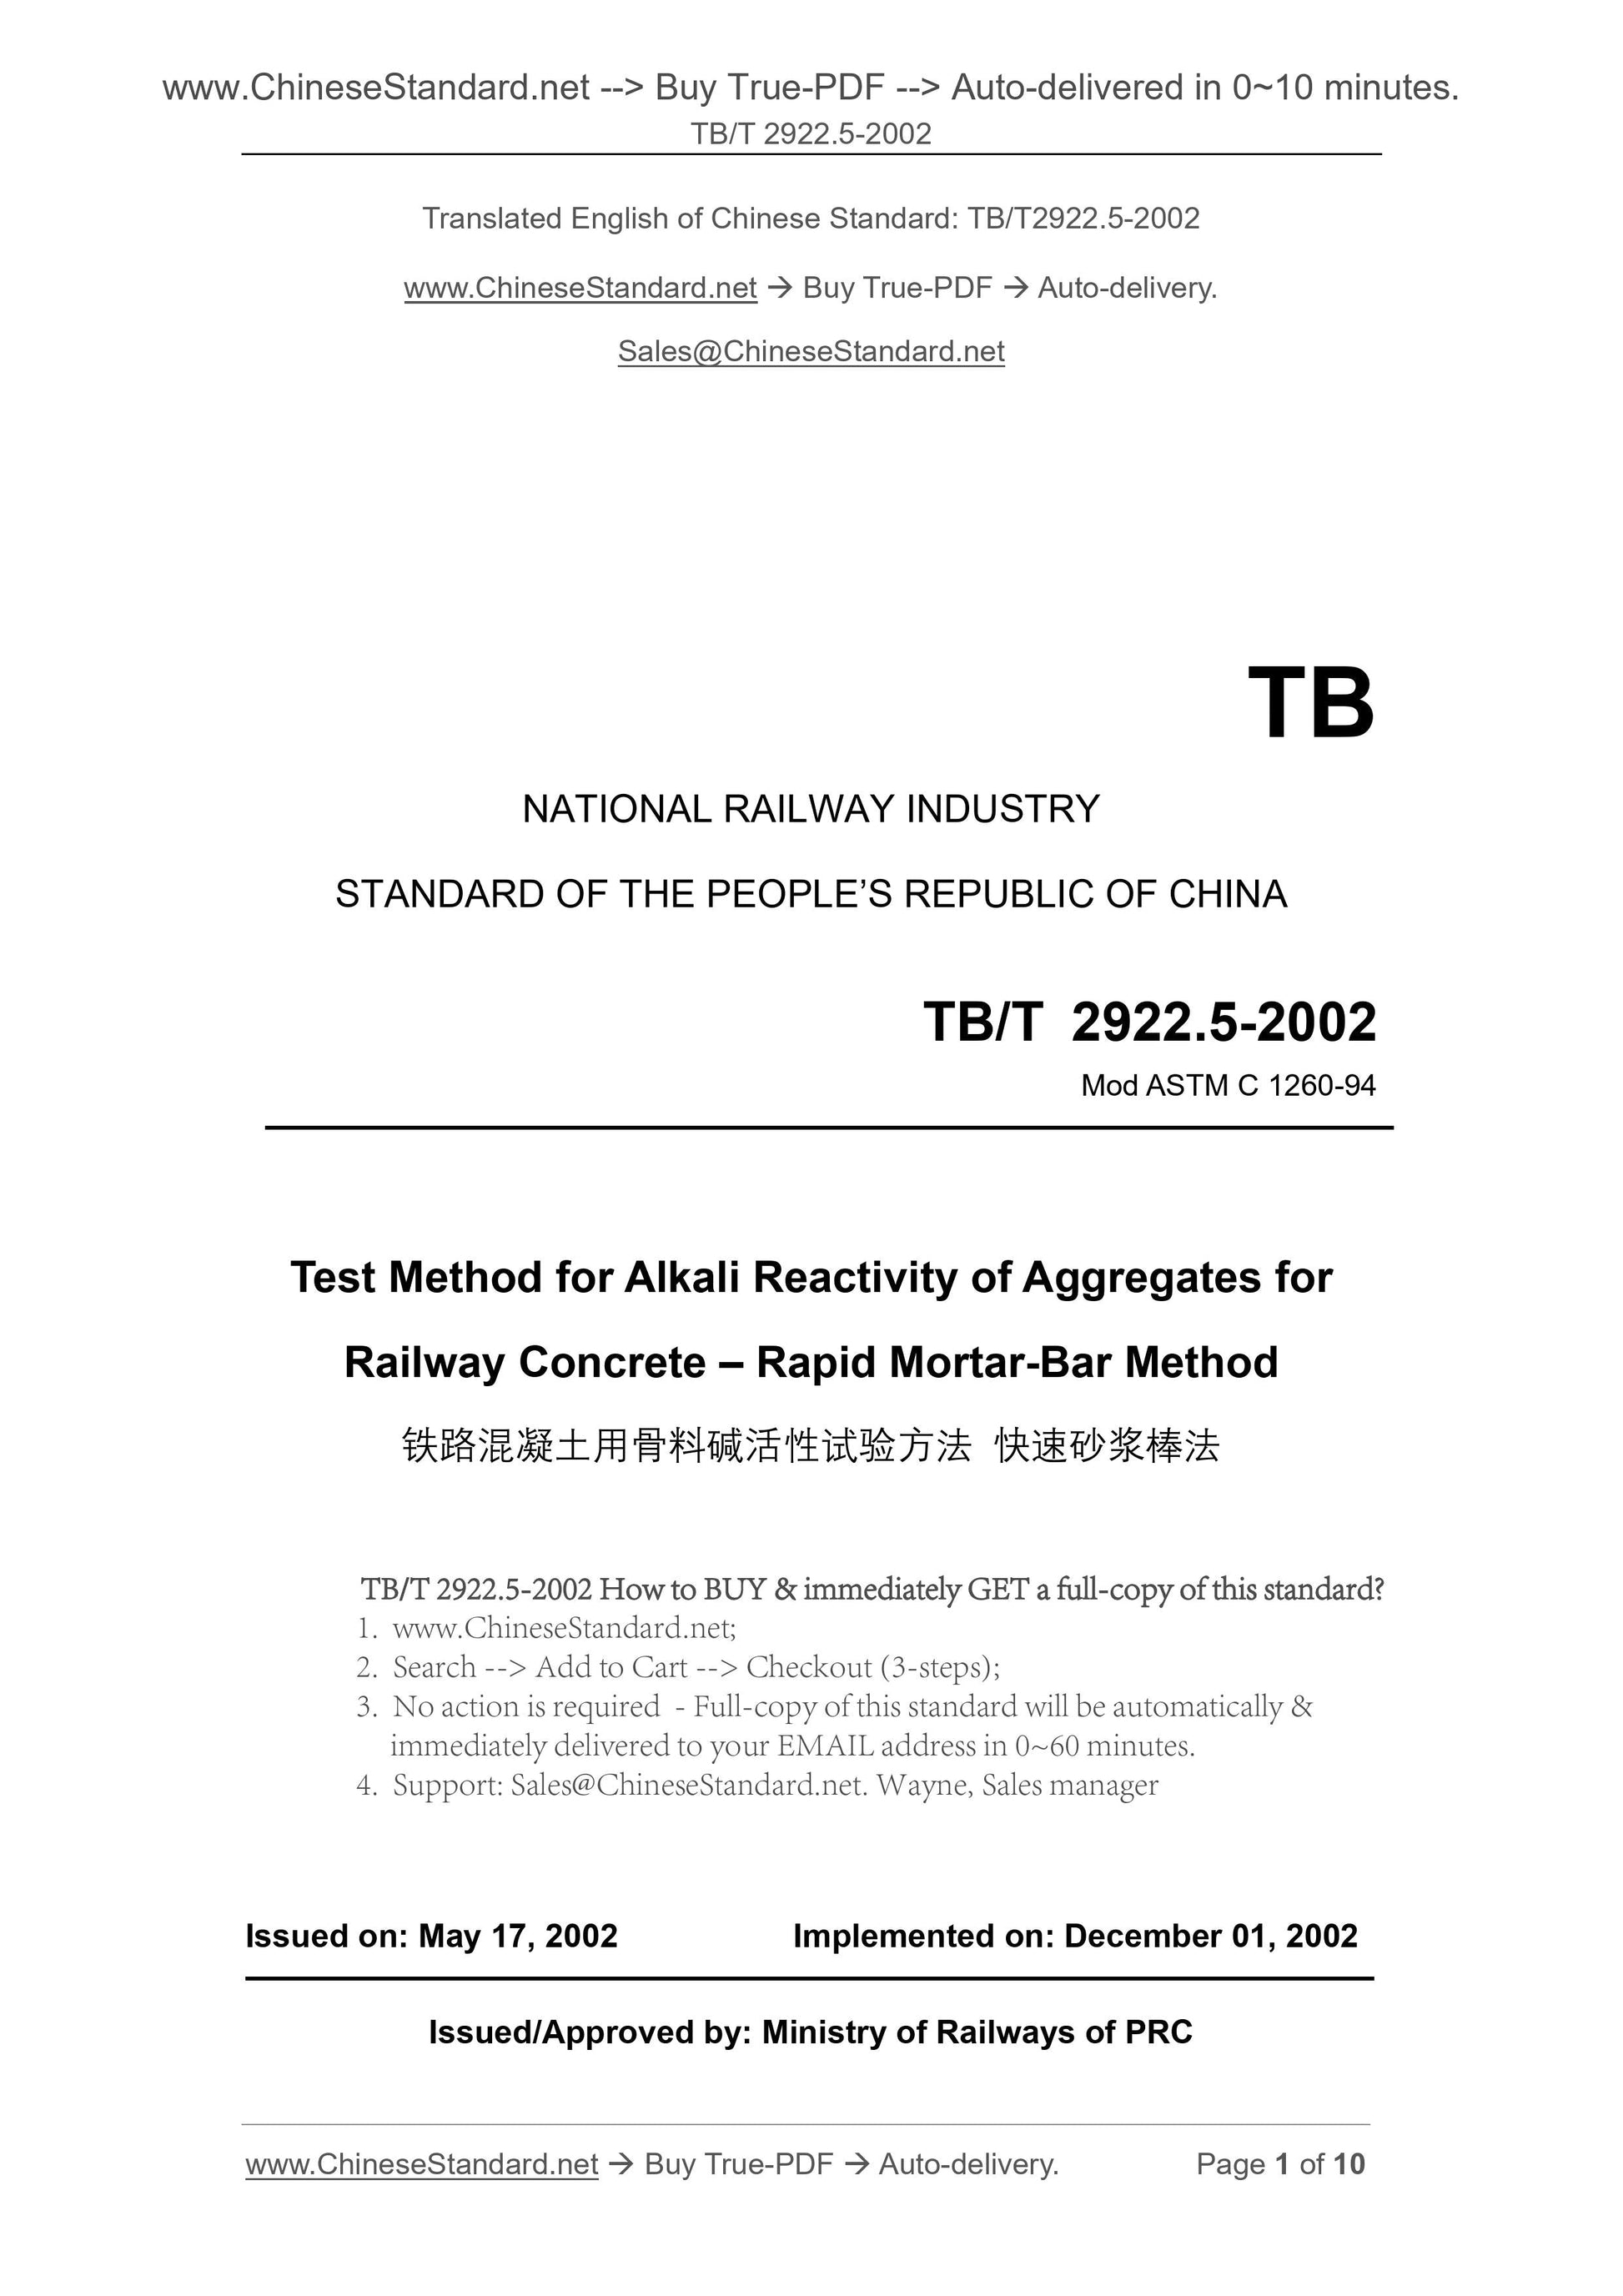 TB/T 2922.5-2002 Page 1